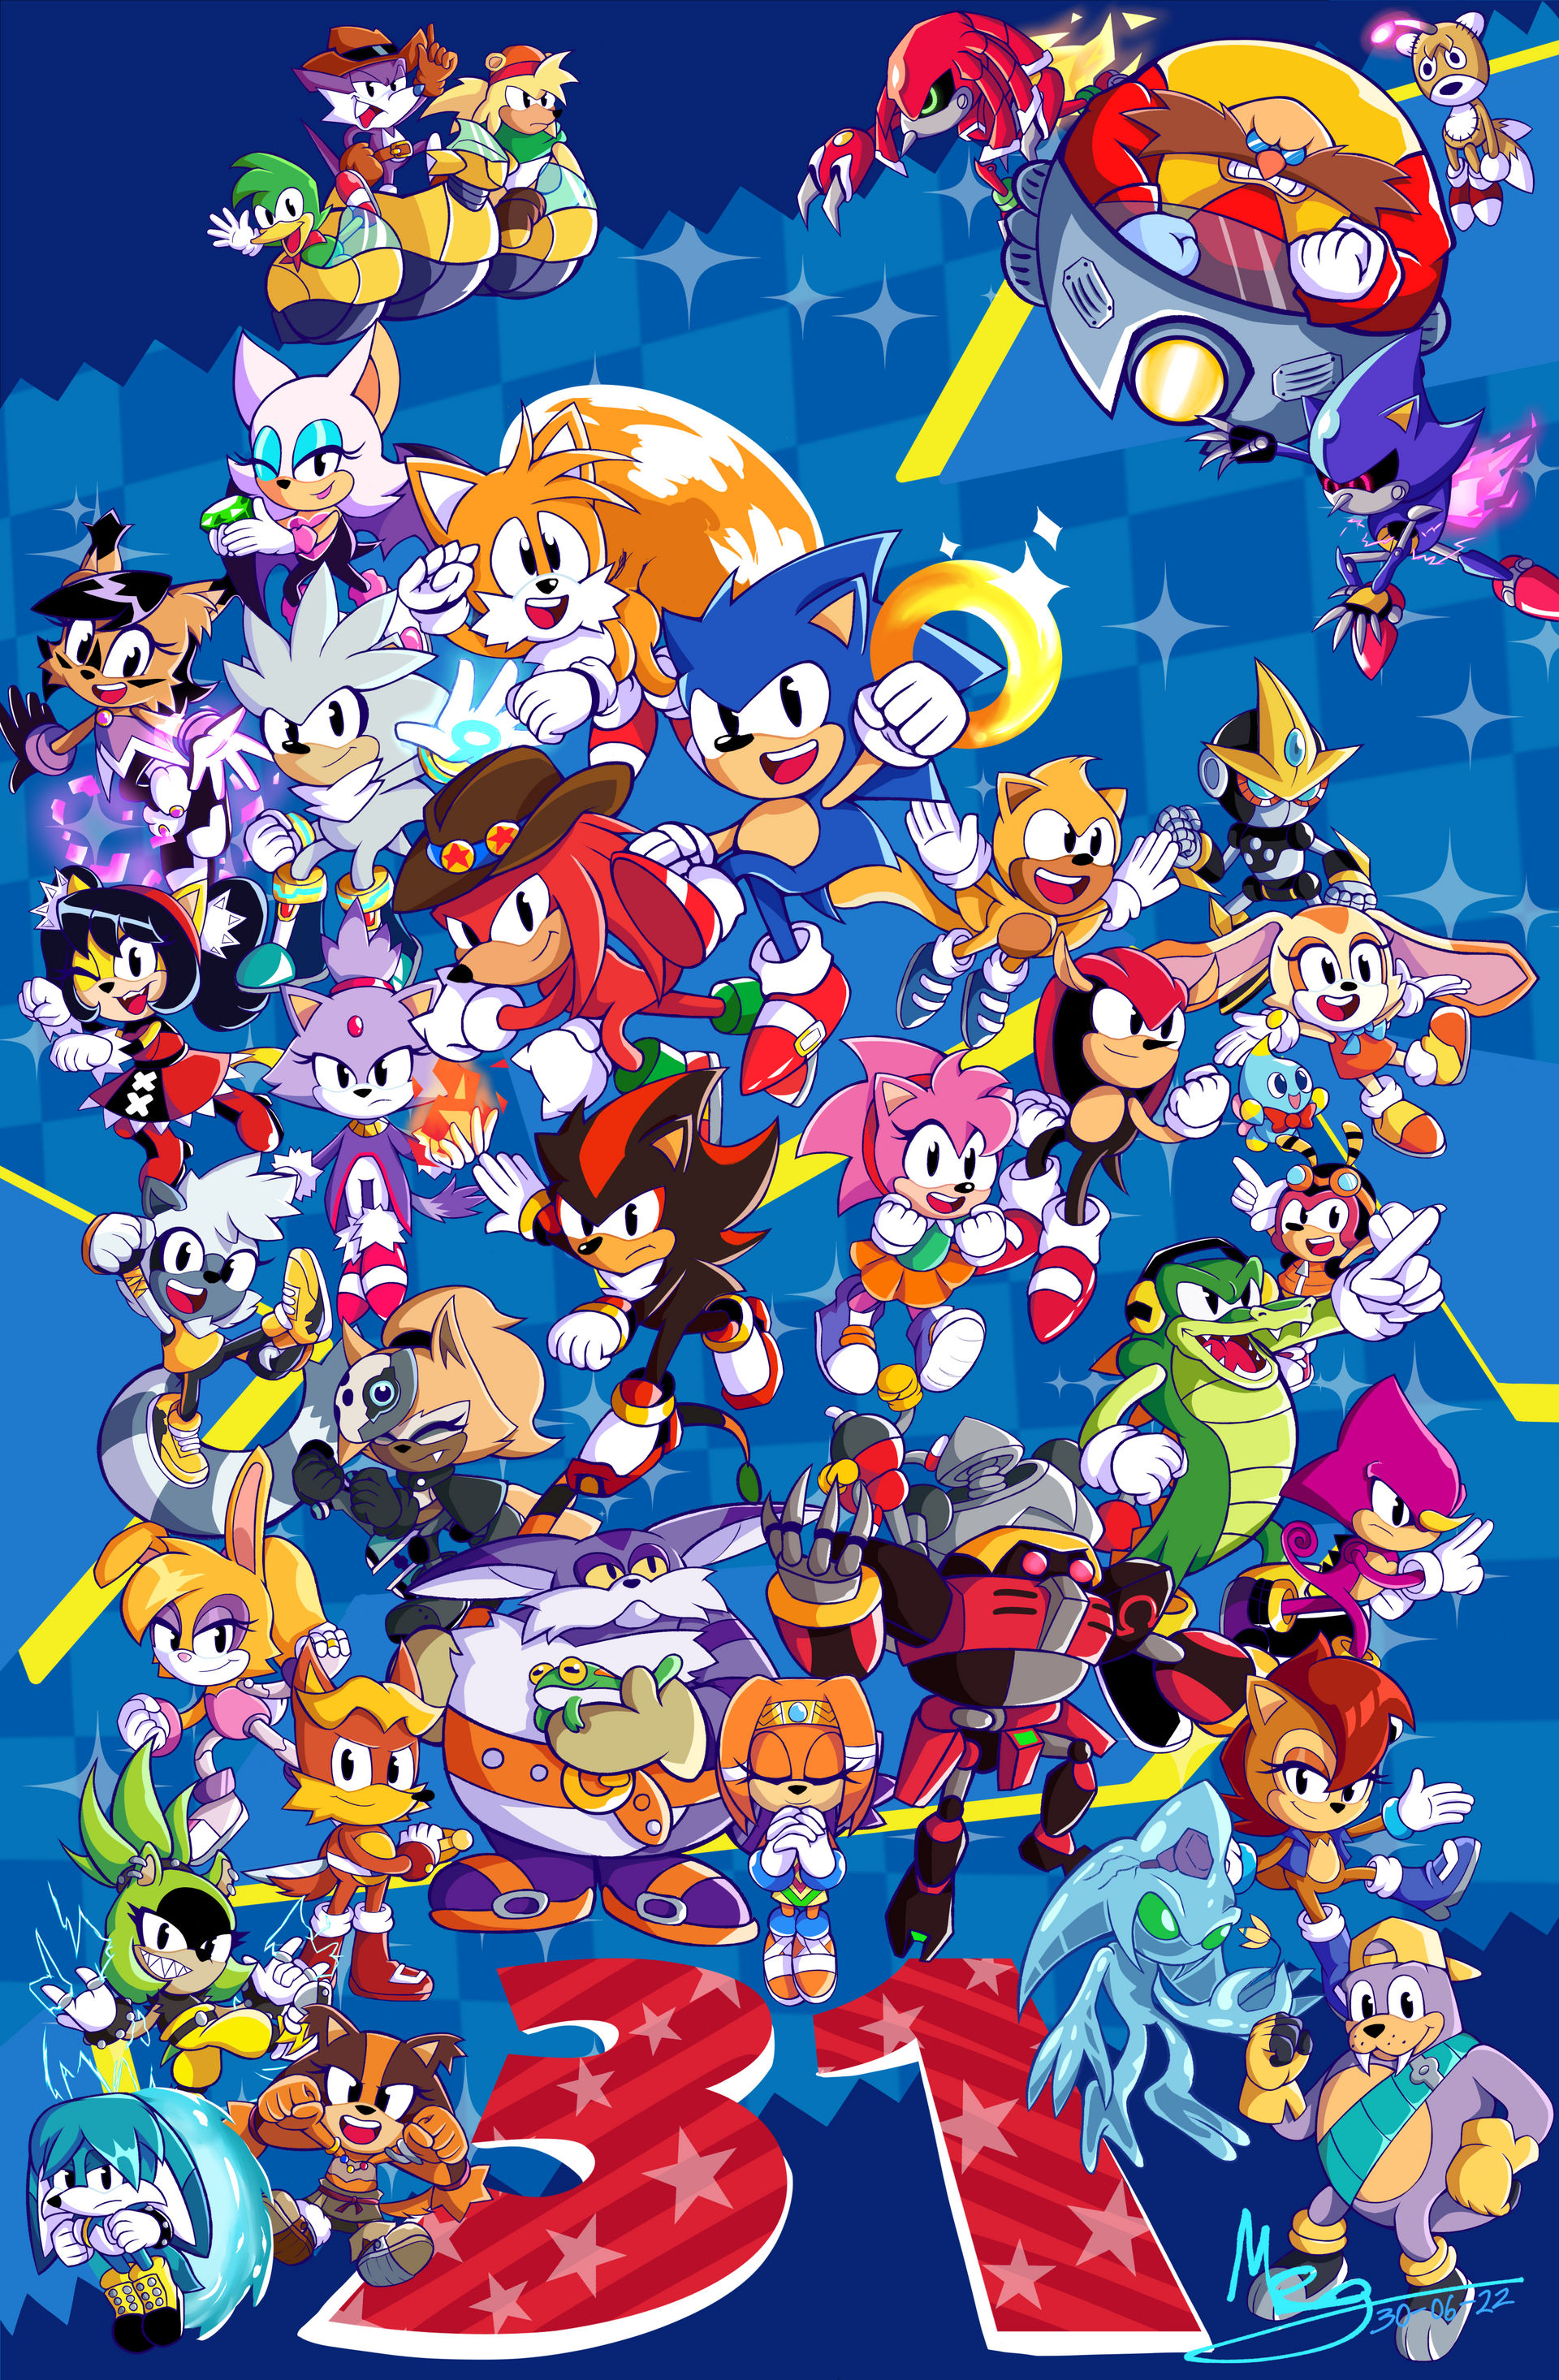 Sonic The Hedgehog 10 Poster by Dinoslayer730 on DeviantArt